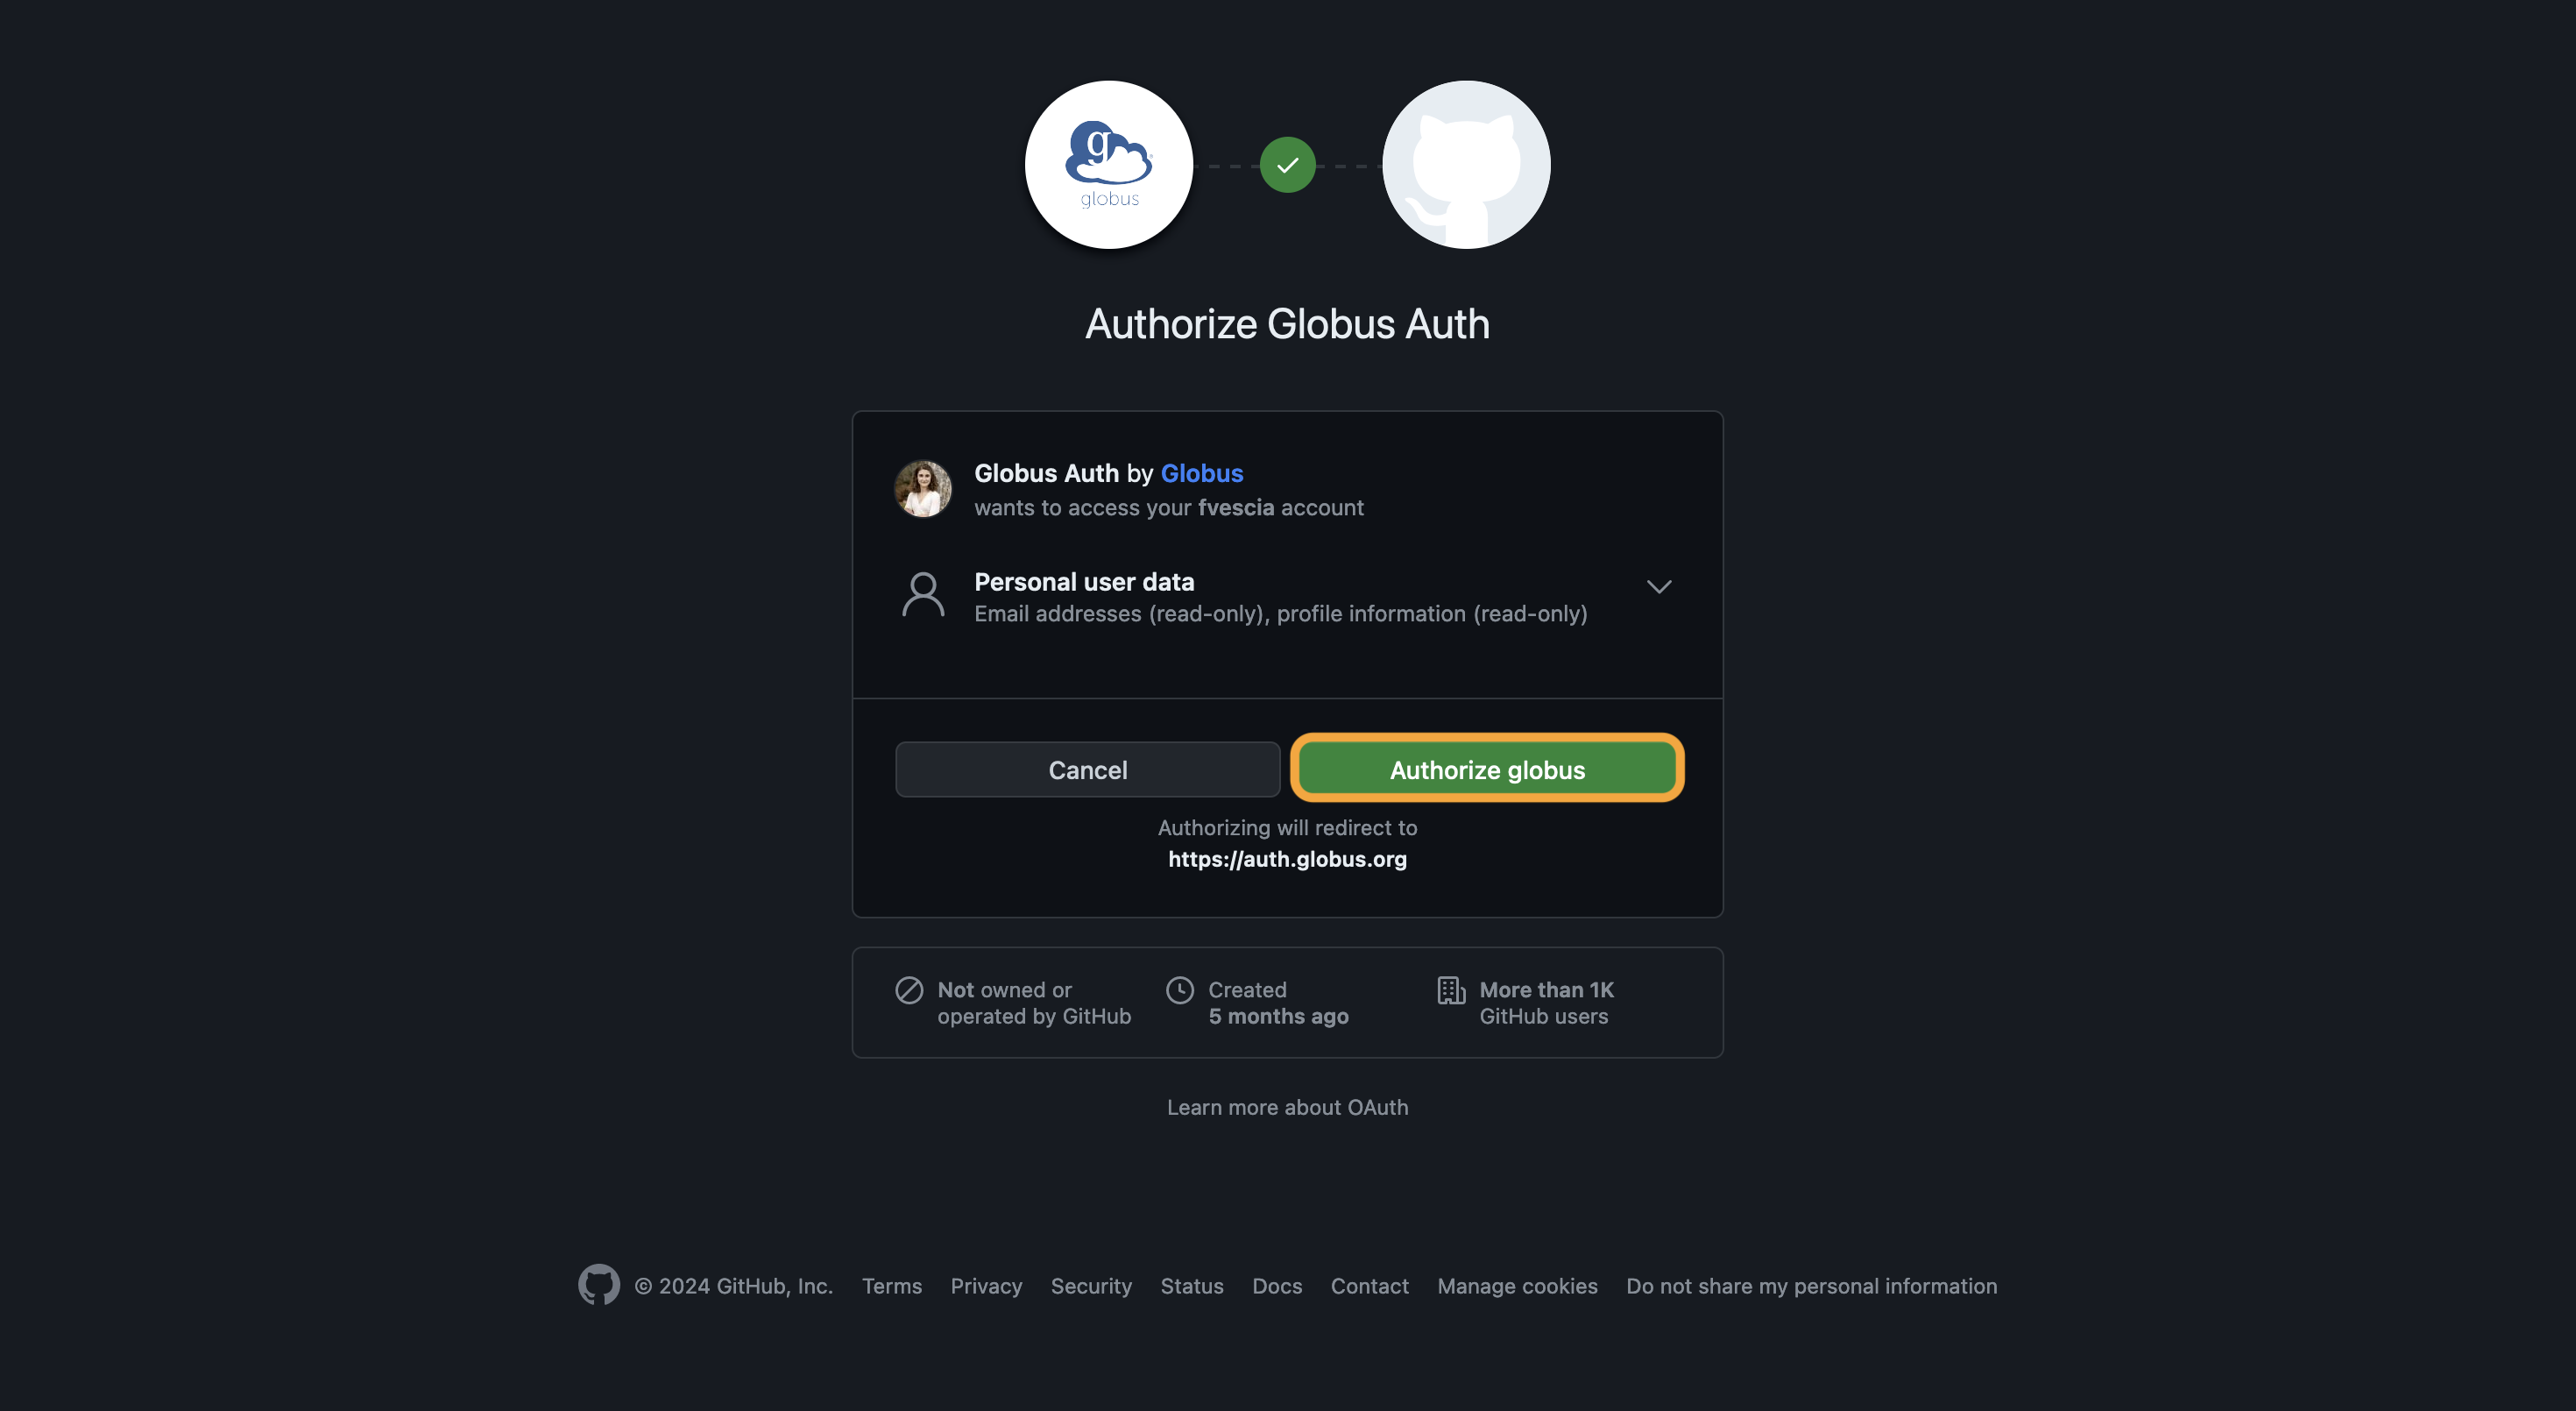 GitHub open to Authorize Globus Auth with Authorize globus highlighted.